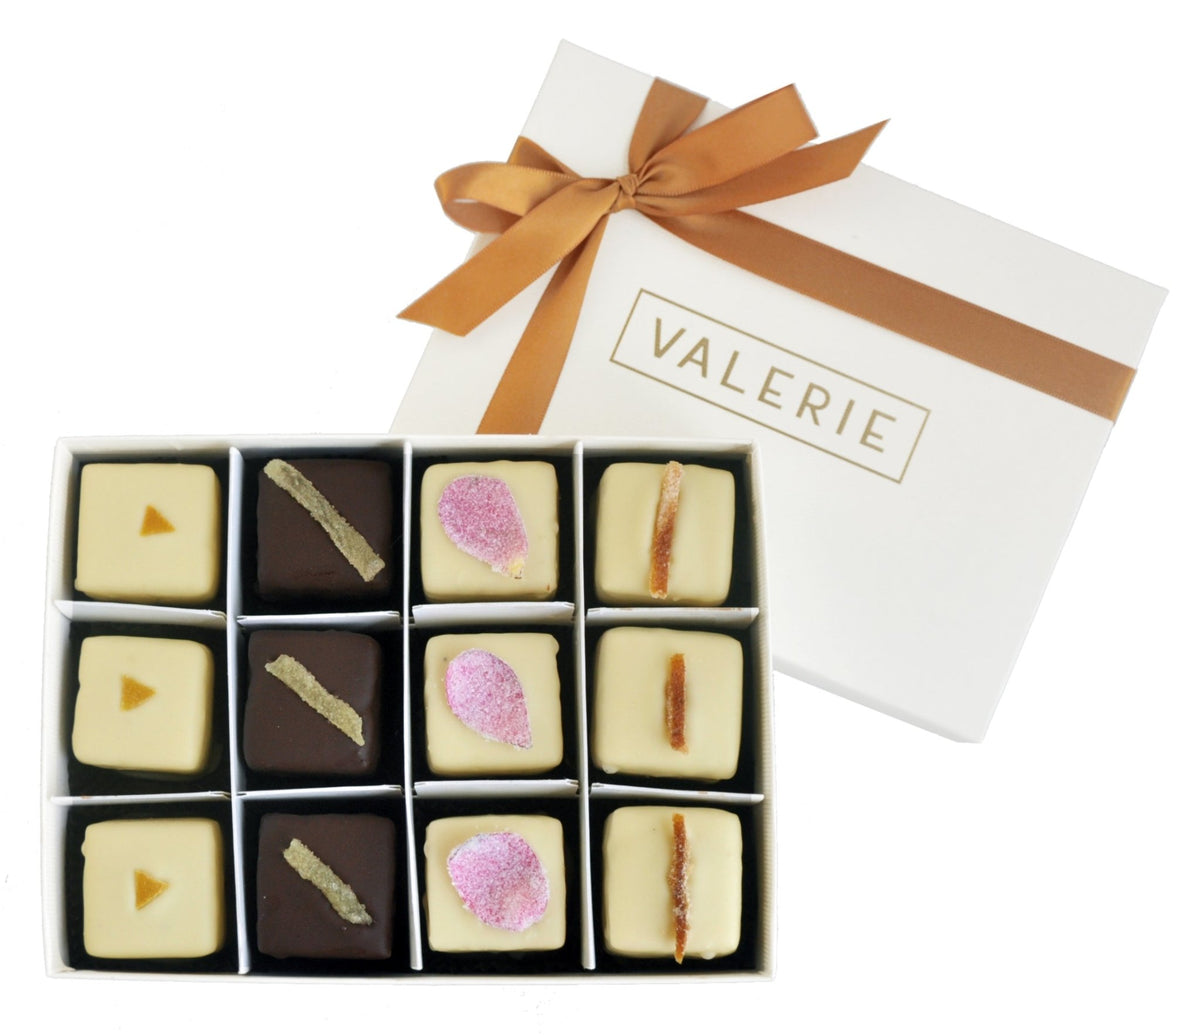 Box of twelve petits fours with decorative toppings and a white lid with a gold ribbon, labeled &quot;VALERIE&quot;.